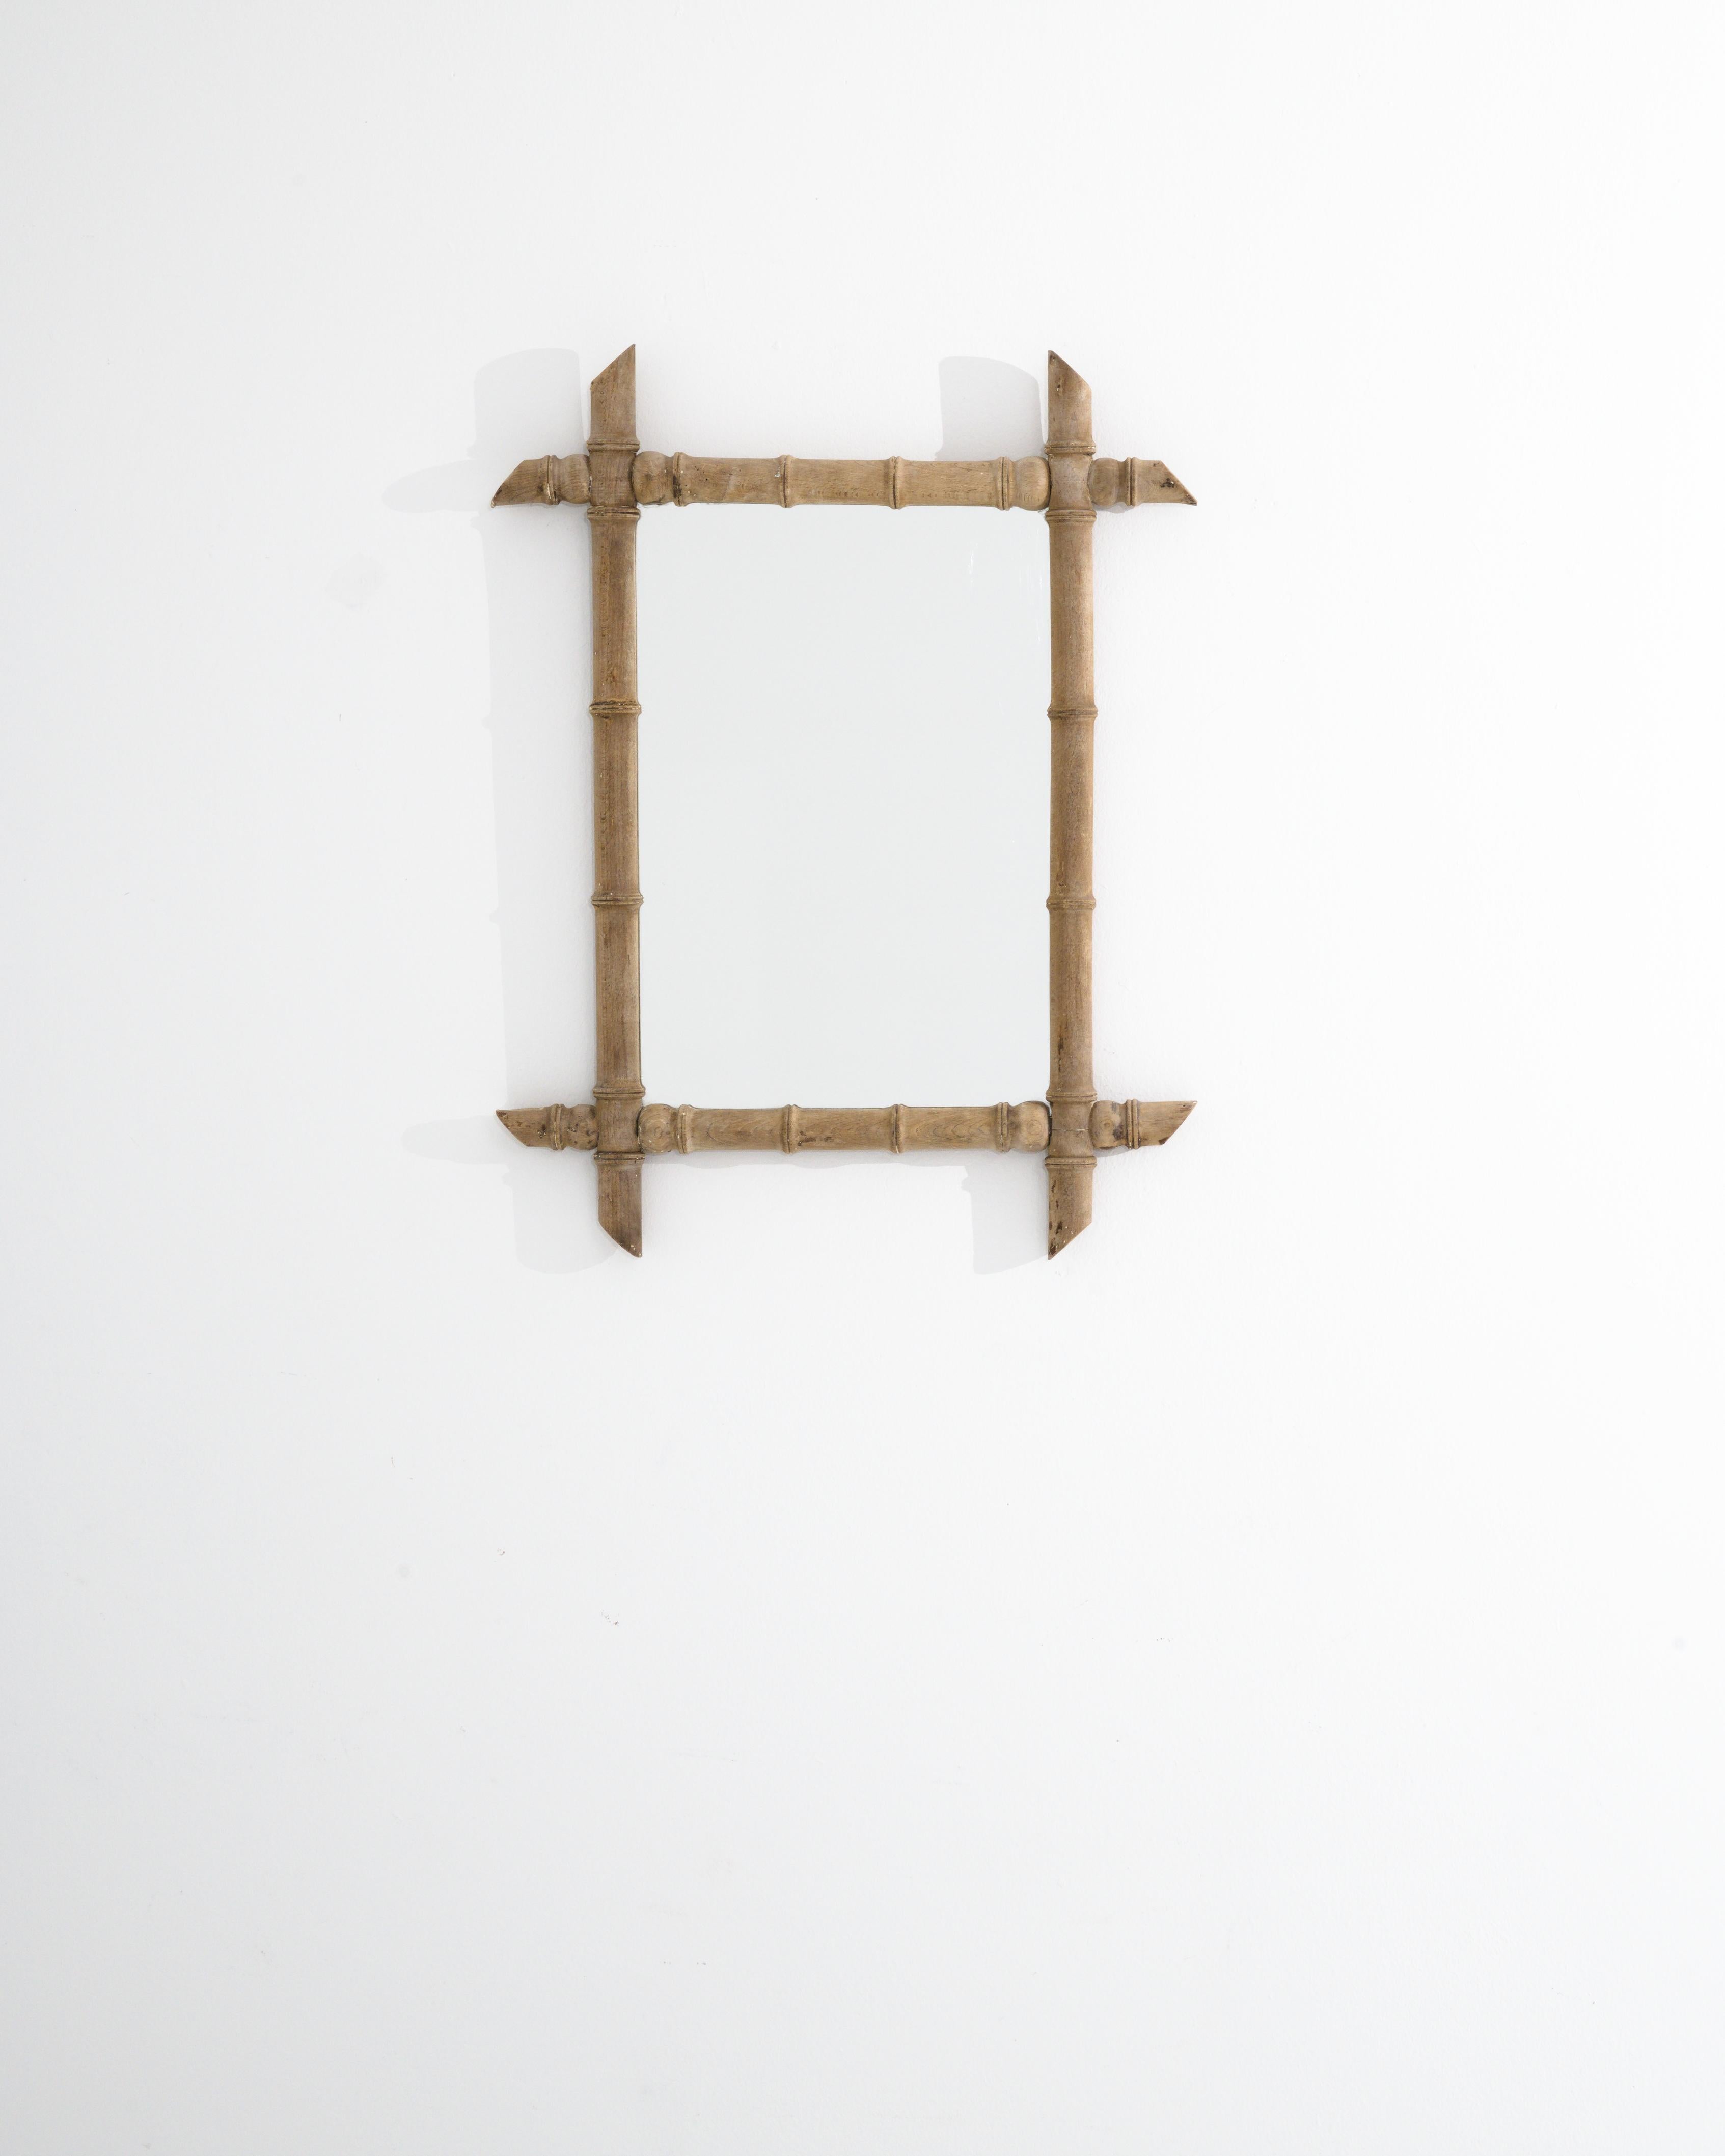 A vintage wooden framed mirror made in 1900s France. Exuding a tropical vivaciousness this simply composed mirror offers a cheery moment of reflection. Beech wood carved into the form of bamboo shoots creates a disarming trompe l'oeil effect, which